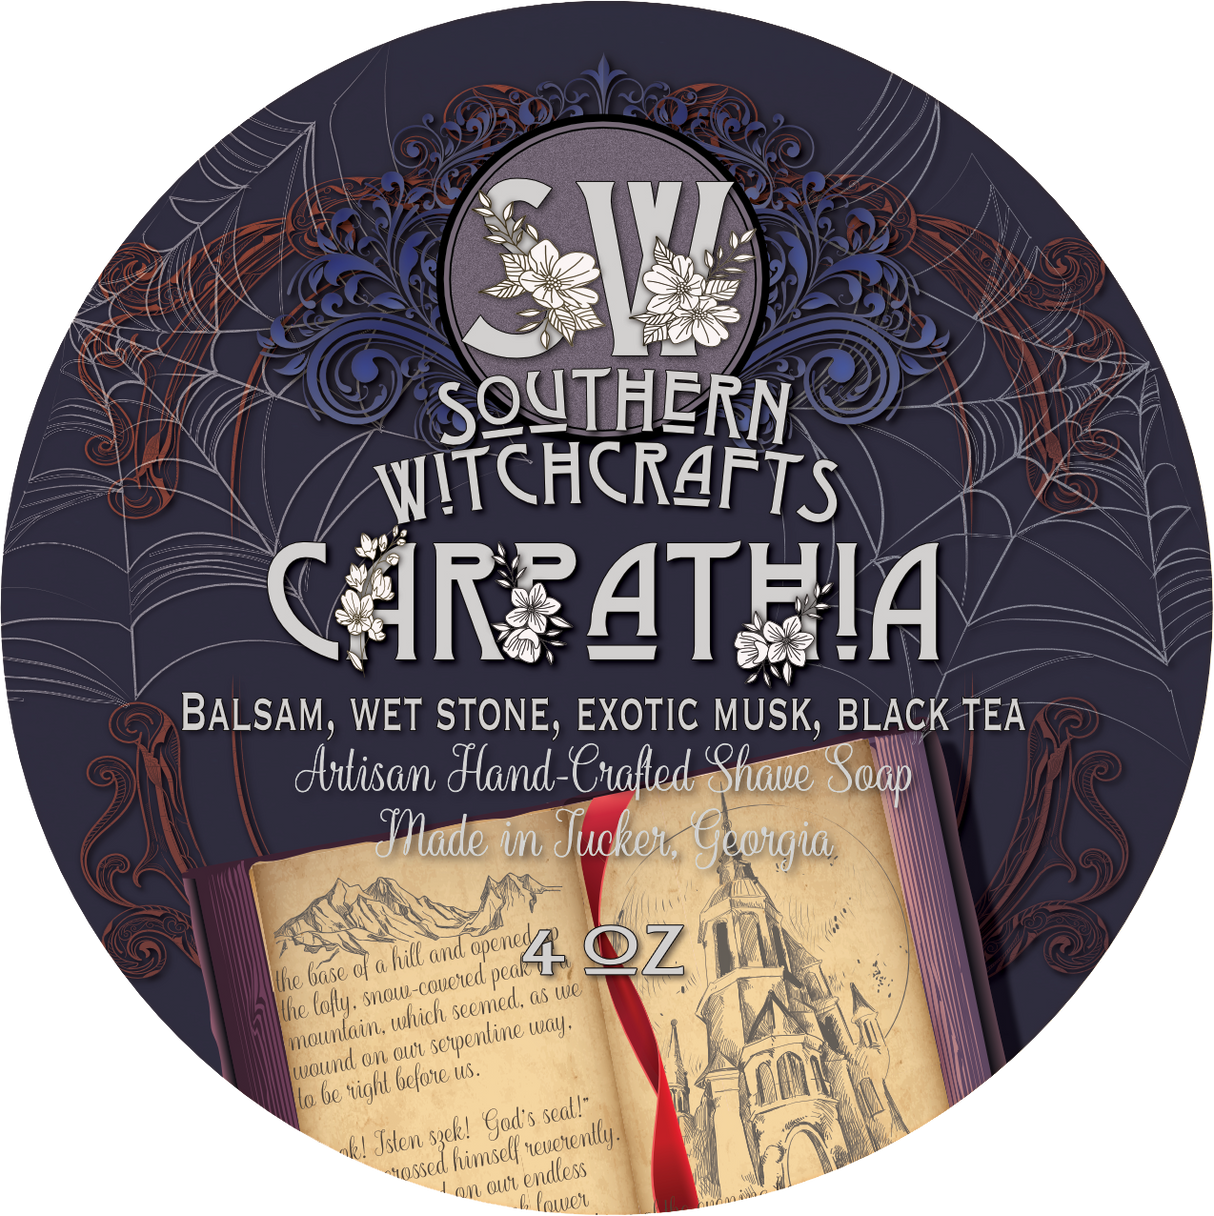 Vegan Shave Soap  Carpathia is a tribute to Bram Stoker’s Dracula: a dark and brooding masculine scent centered around accords of black tea, exotic musk, and evergreen balsam.  Notes: Evergreen forest, musk, herbs, rose, coffee, black tea